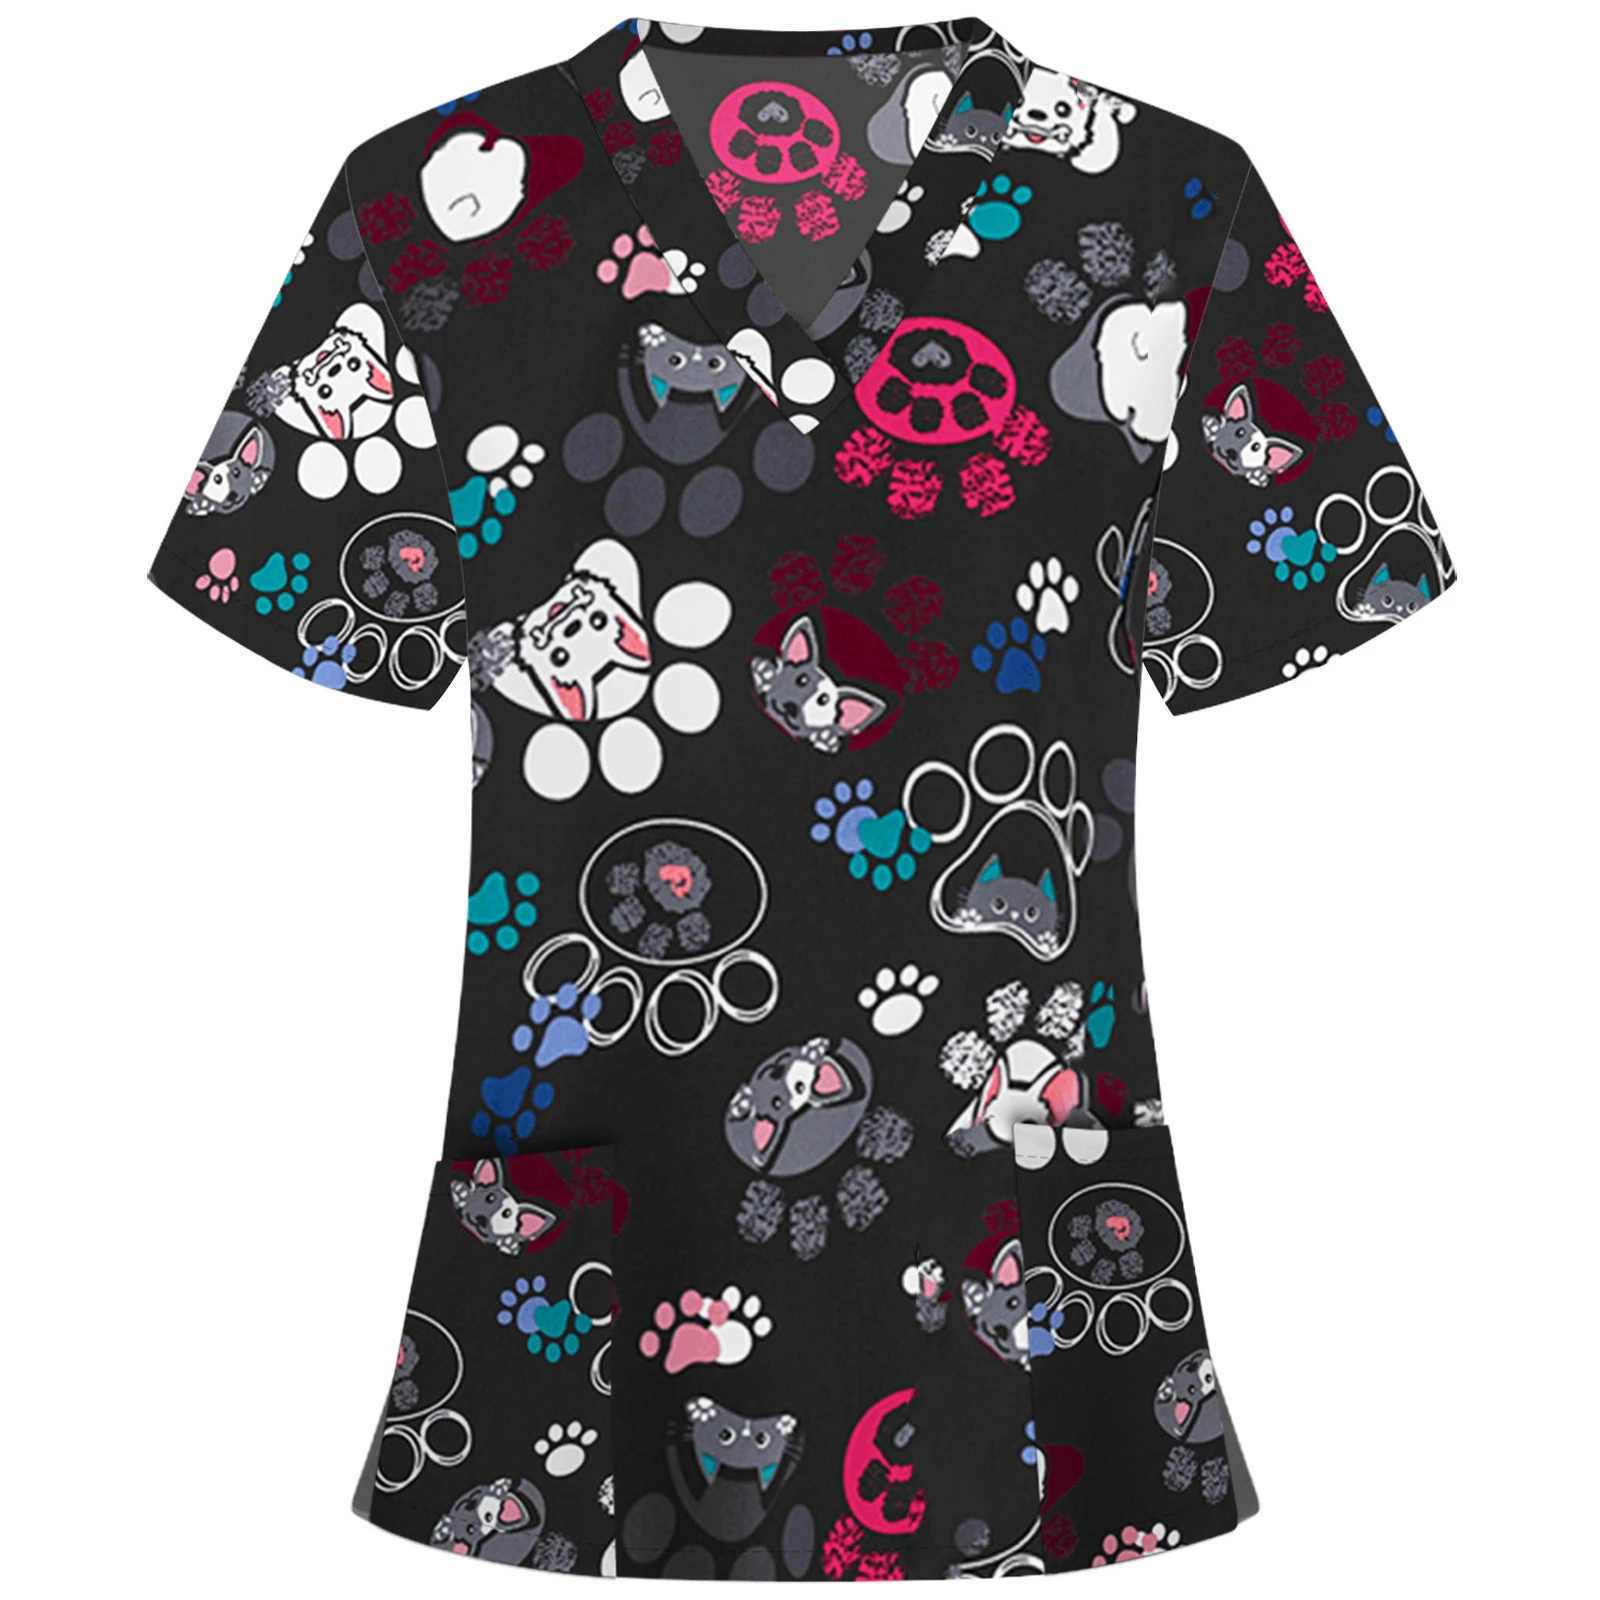 Uniform Work Unisex V-neck Tops Experimenter Scrubs Set High Quality Print Pet Grooming Institutions Beauty Salon Clothes #T1Q vintage graphic tees